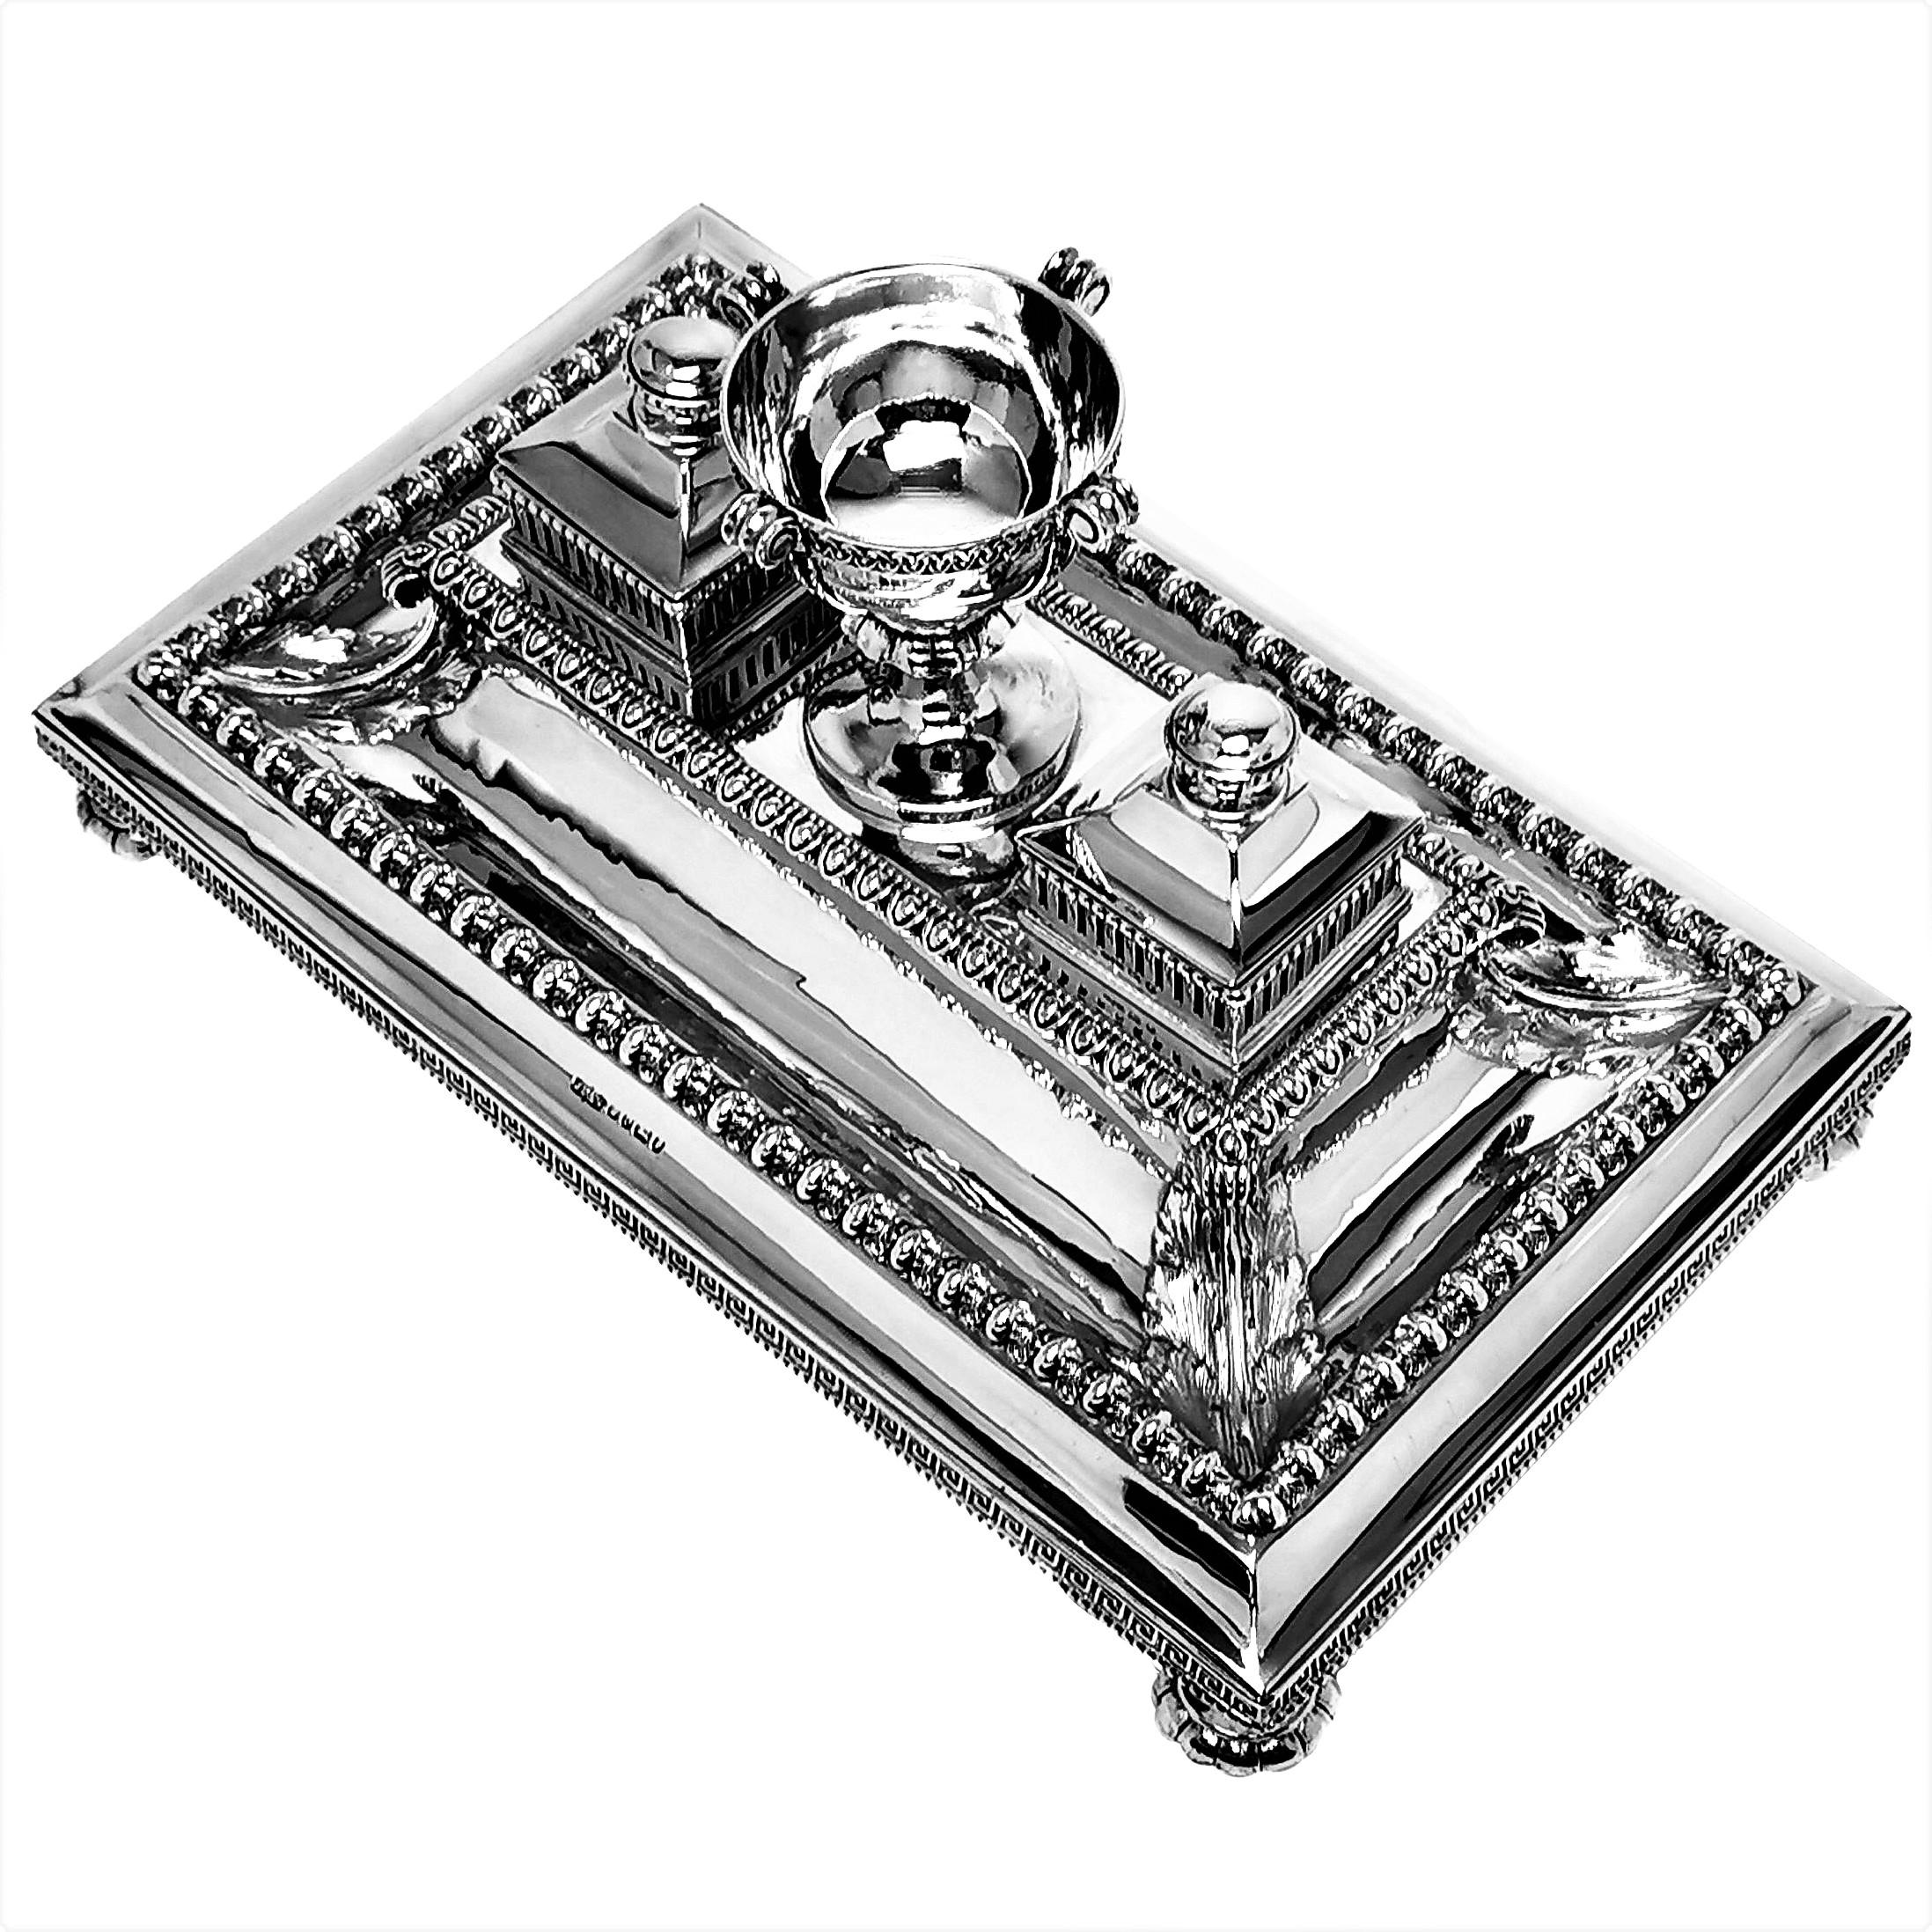 A beautiful Antique Victorian Solid Silver Inkstand with two glass lined Inkwells with hinged lids. The base of the inkstand has a classic Greek Key pattern around the sides and rows of chased patterning on the body connected with ornate stylised